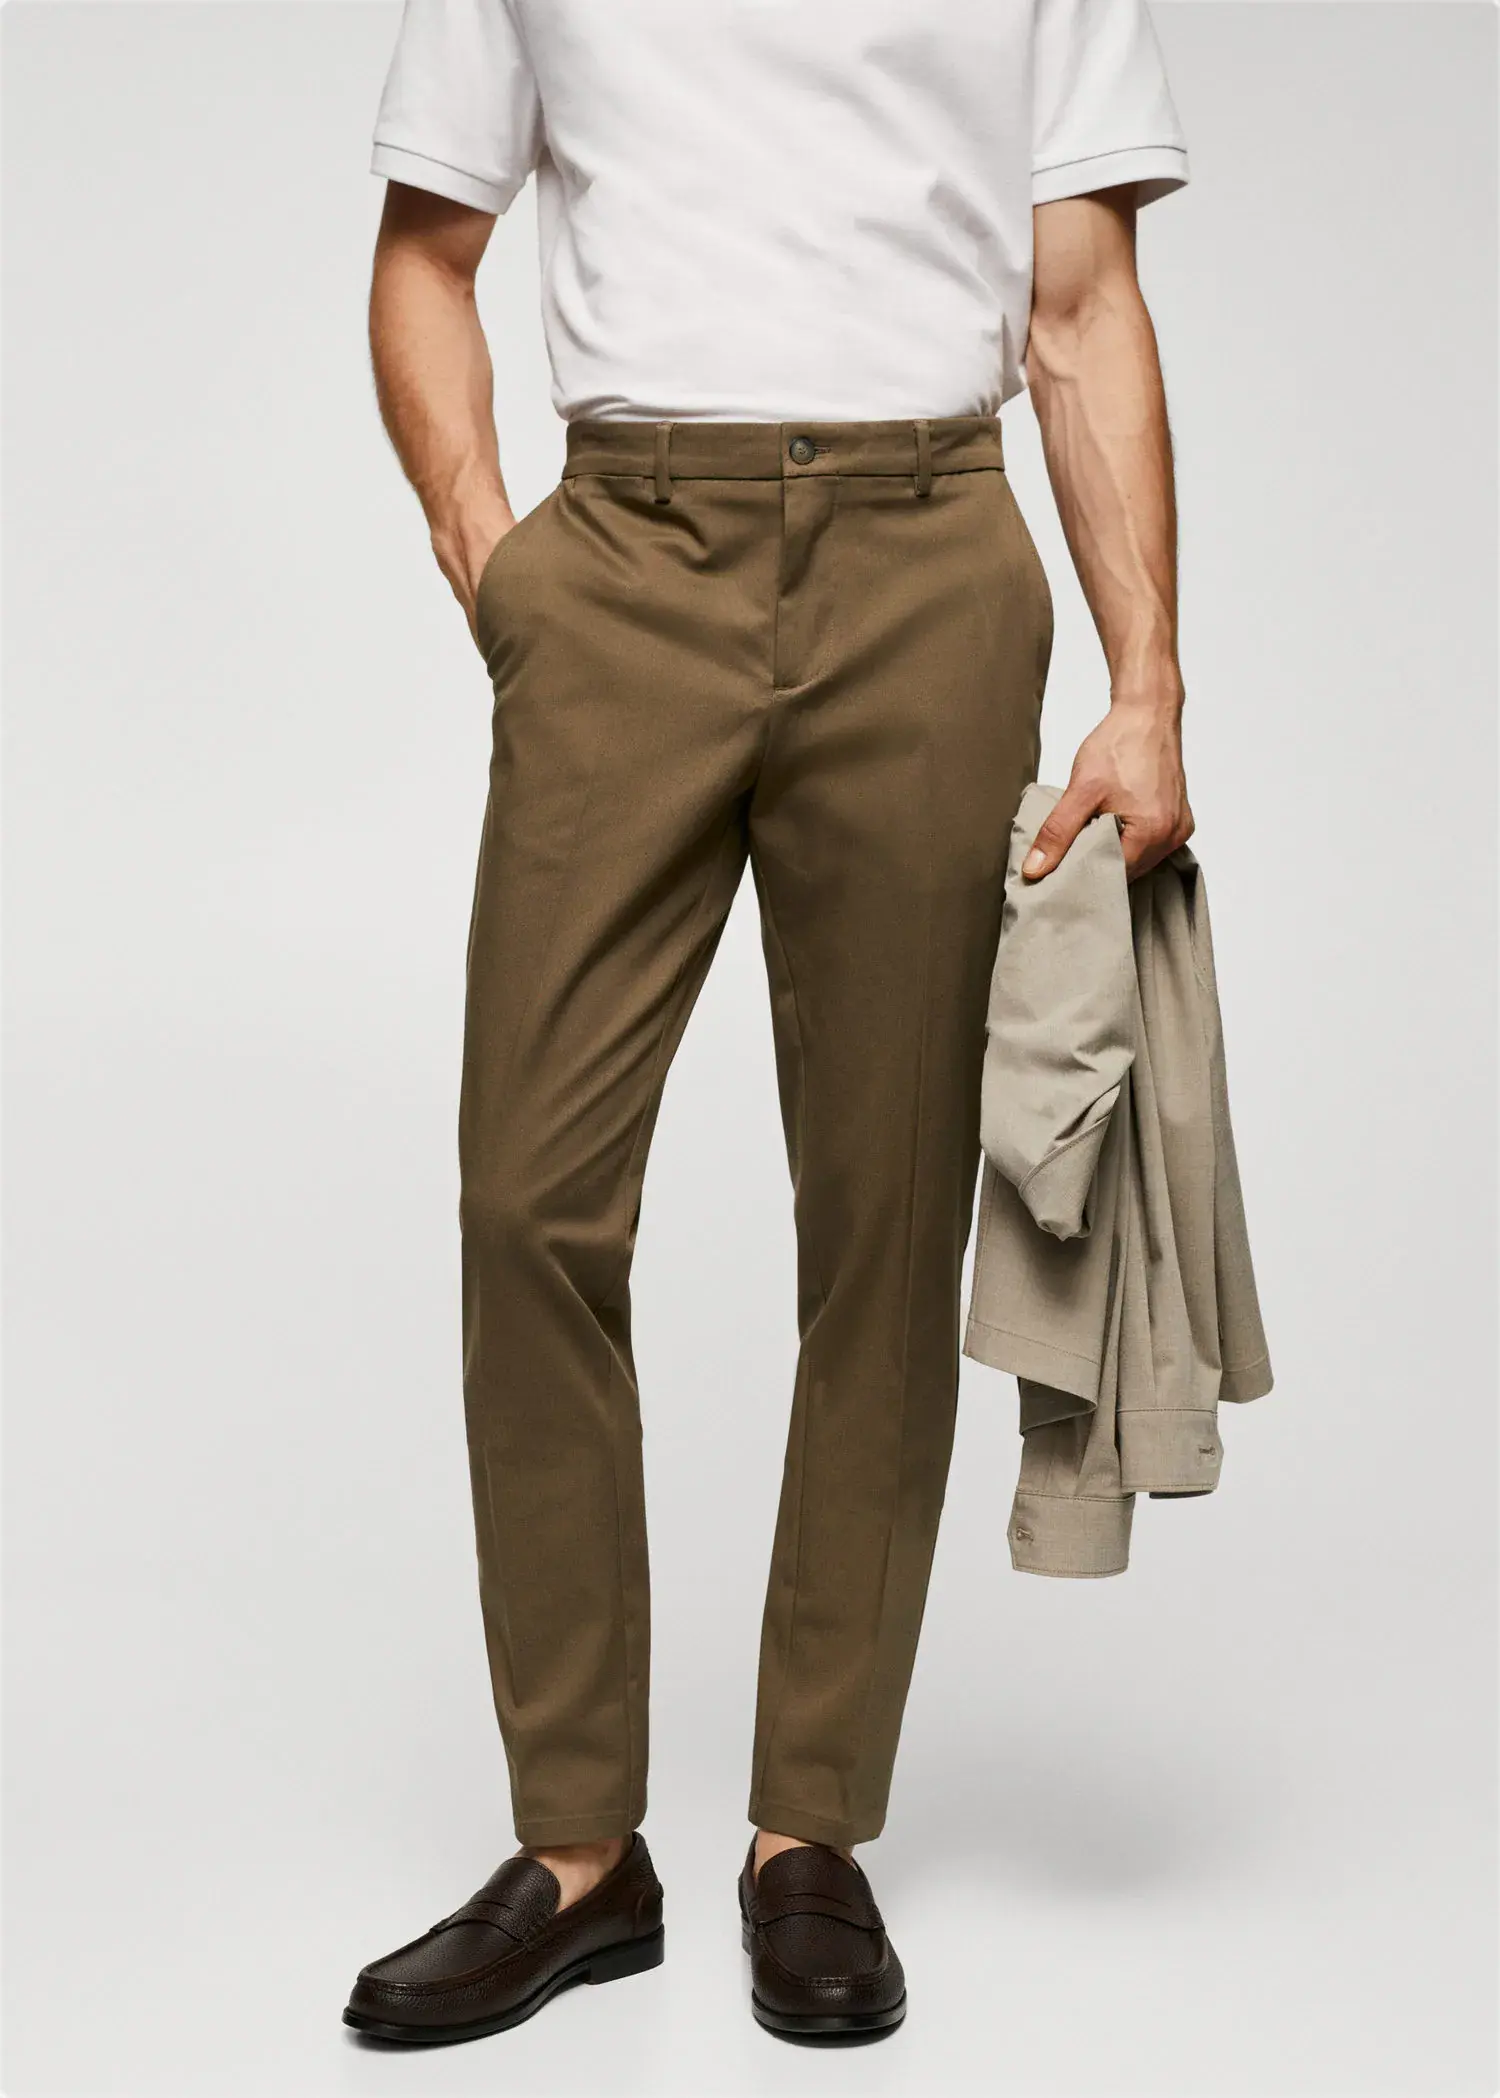 Mango Slim fit chino trousers. a man wearing a white shirt and brown pants. 